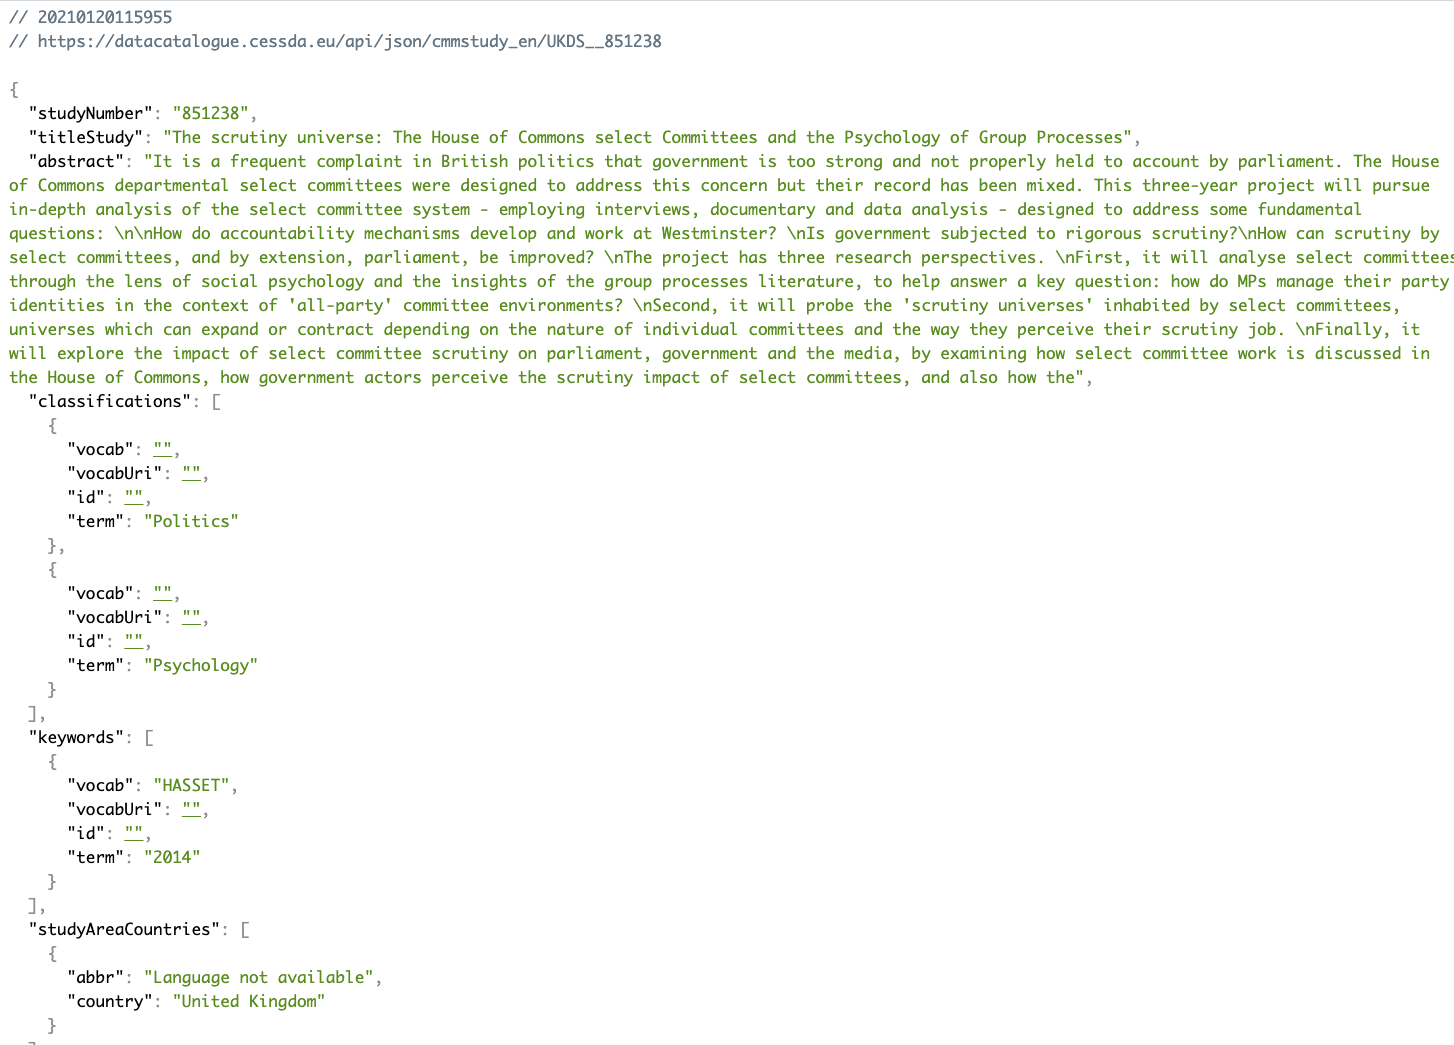 Formatted JSON view